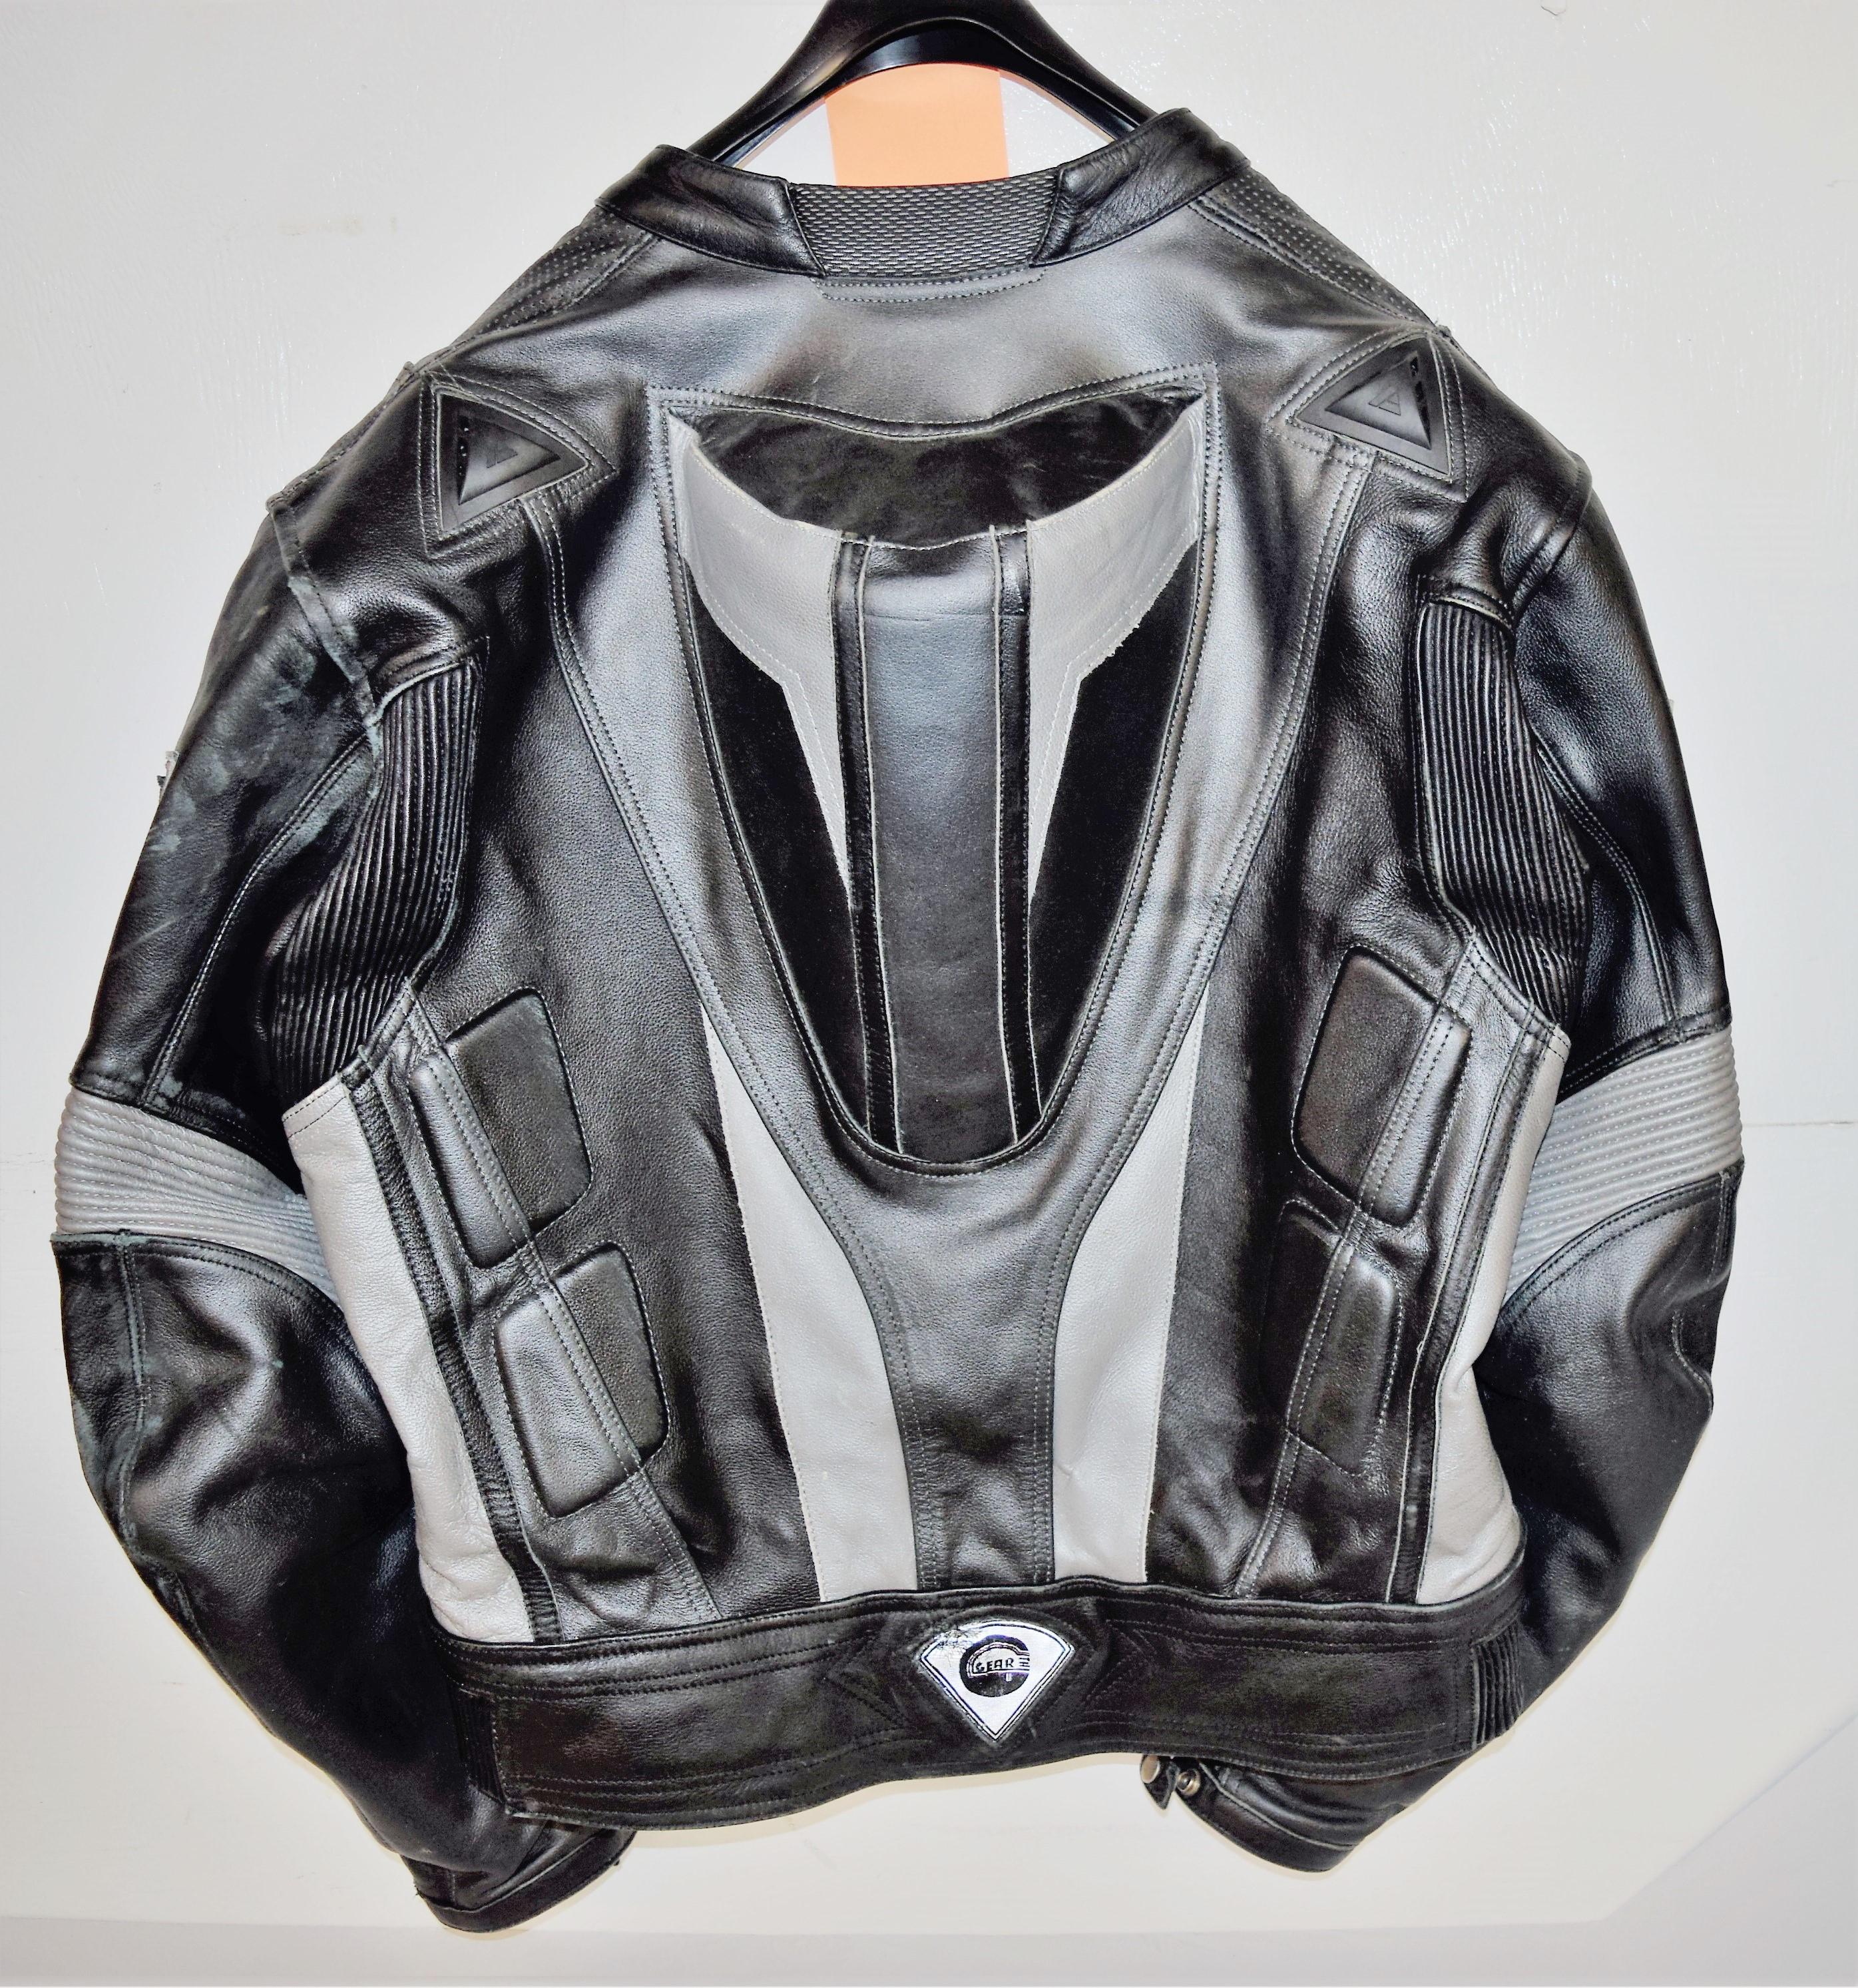 XXL Gear Leather Racing Jacket & Leather Pants w/ Protective Pads